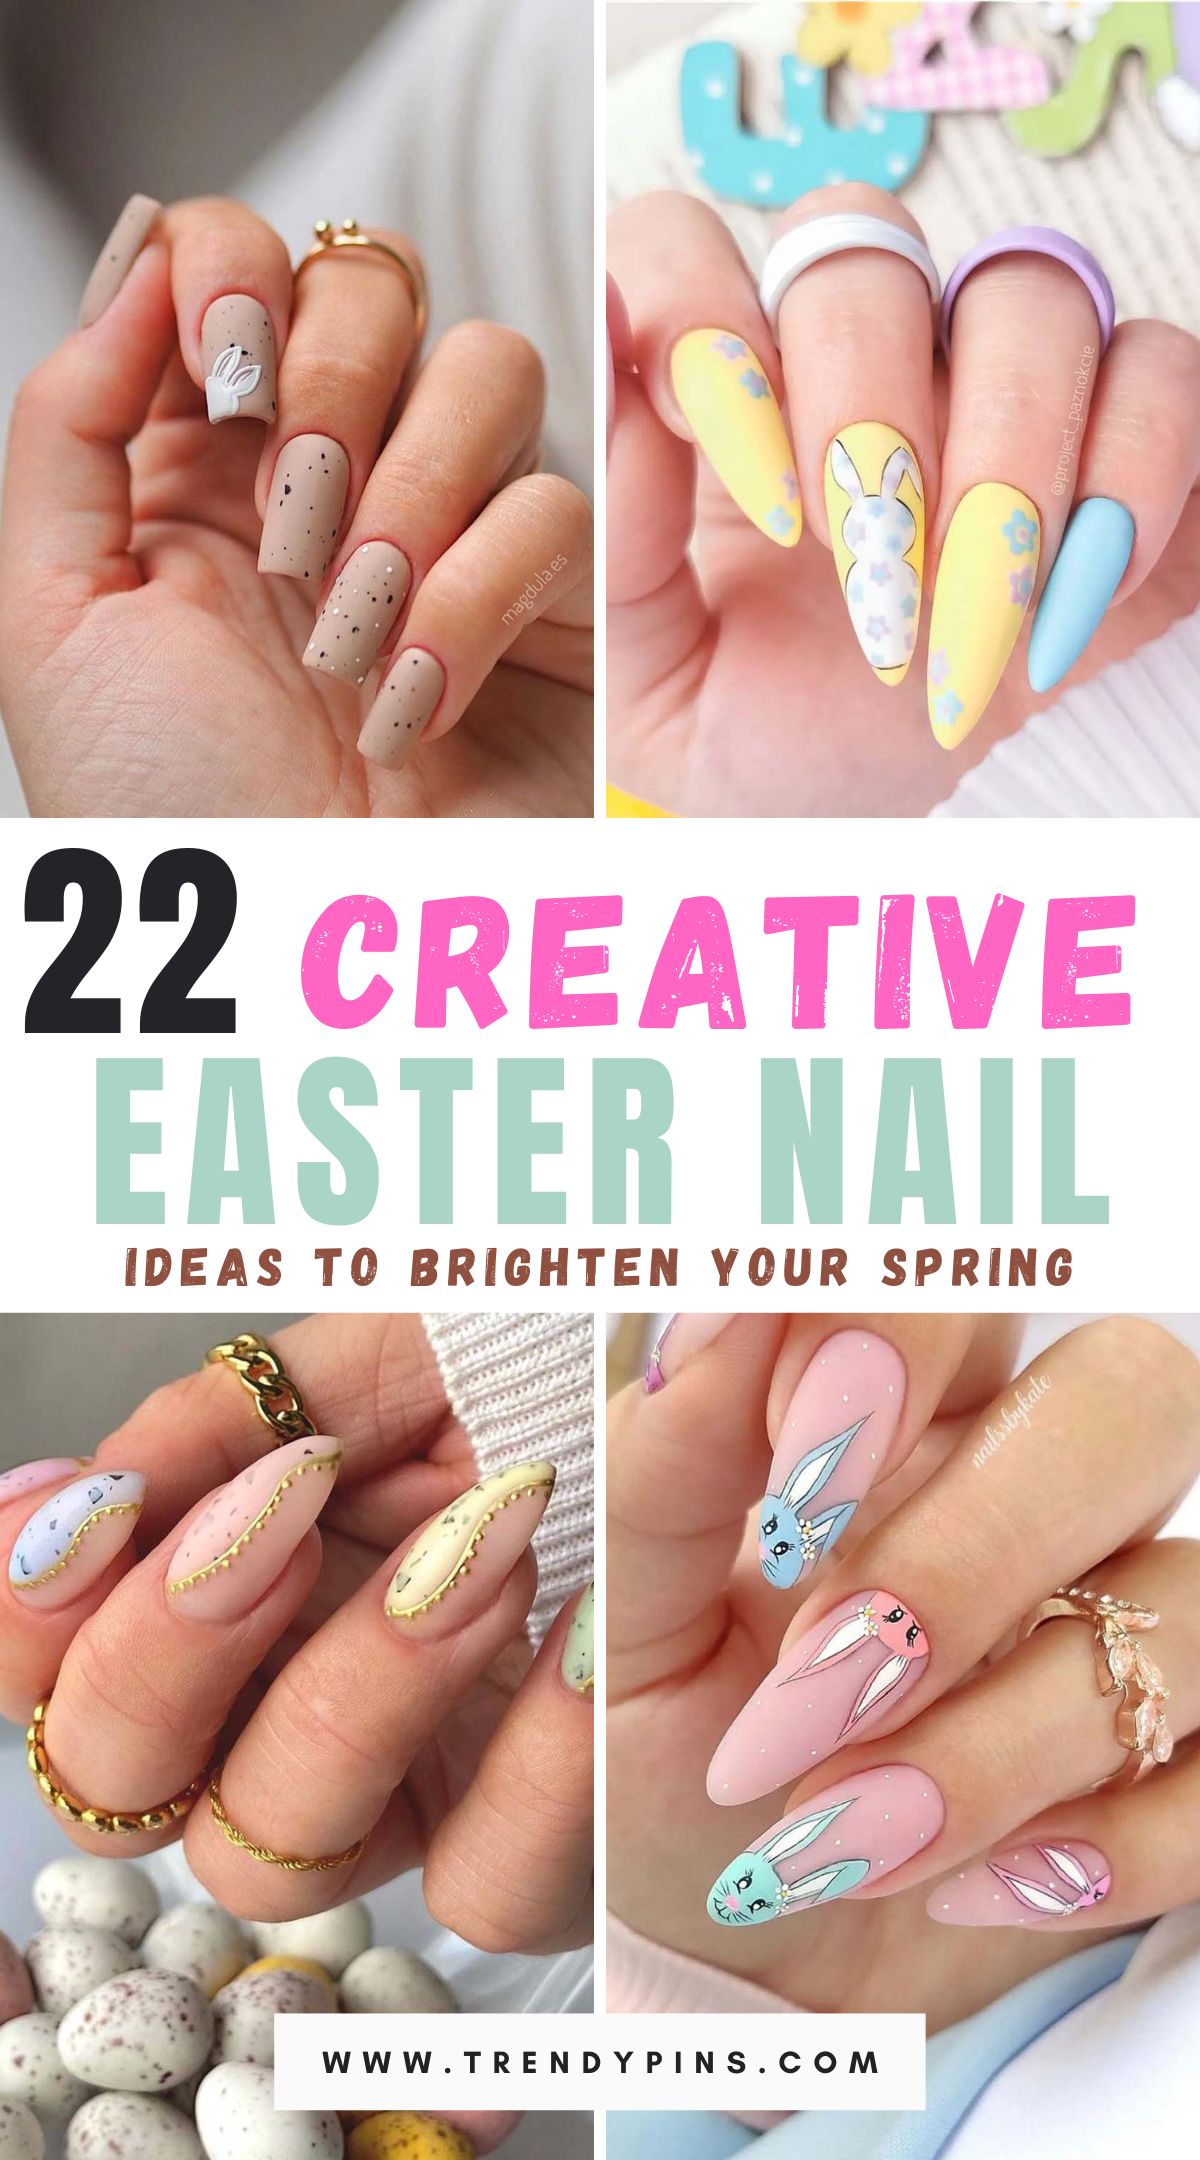 Discover 22 fun and festive Easter nail designs to add a springtime flair to your holiday look. Perfect for a hoppy celebration!